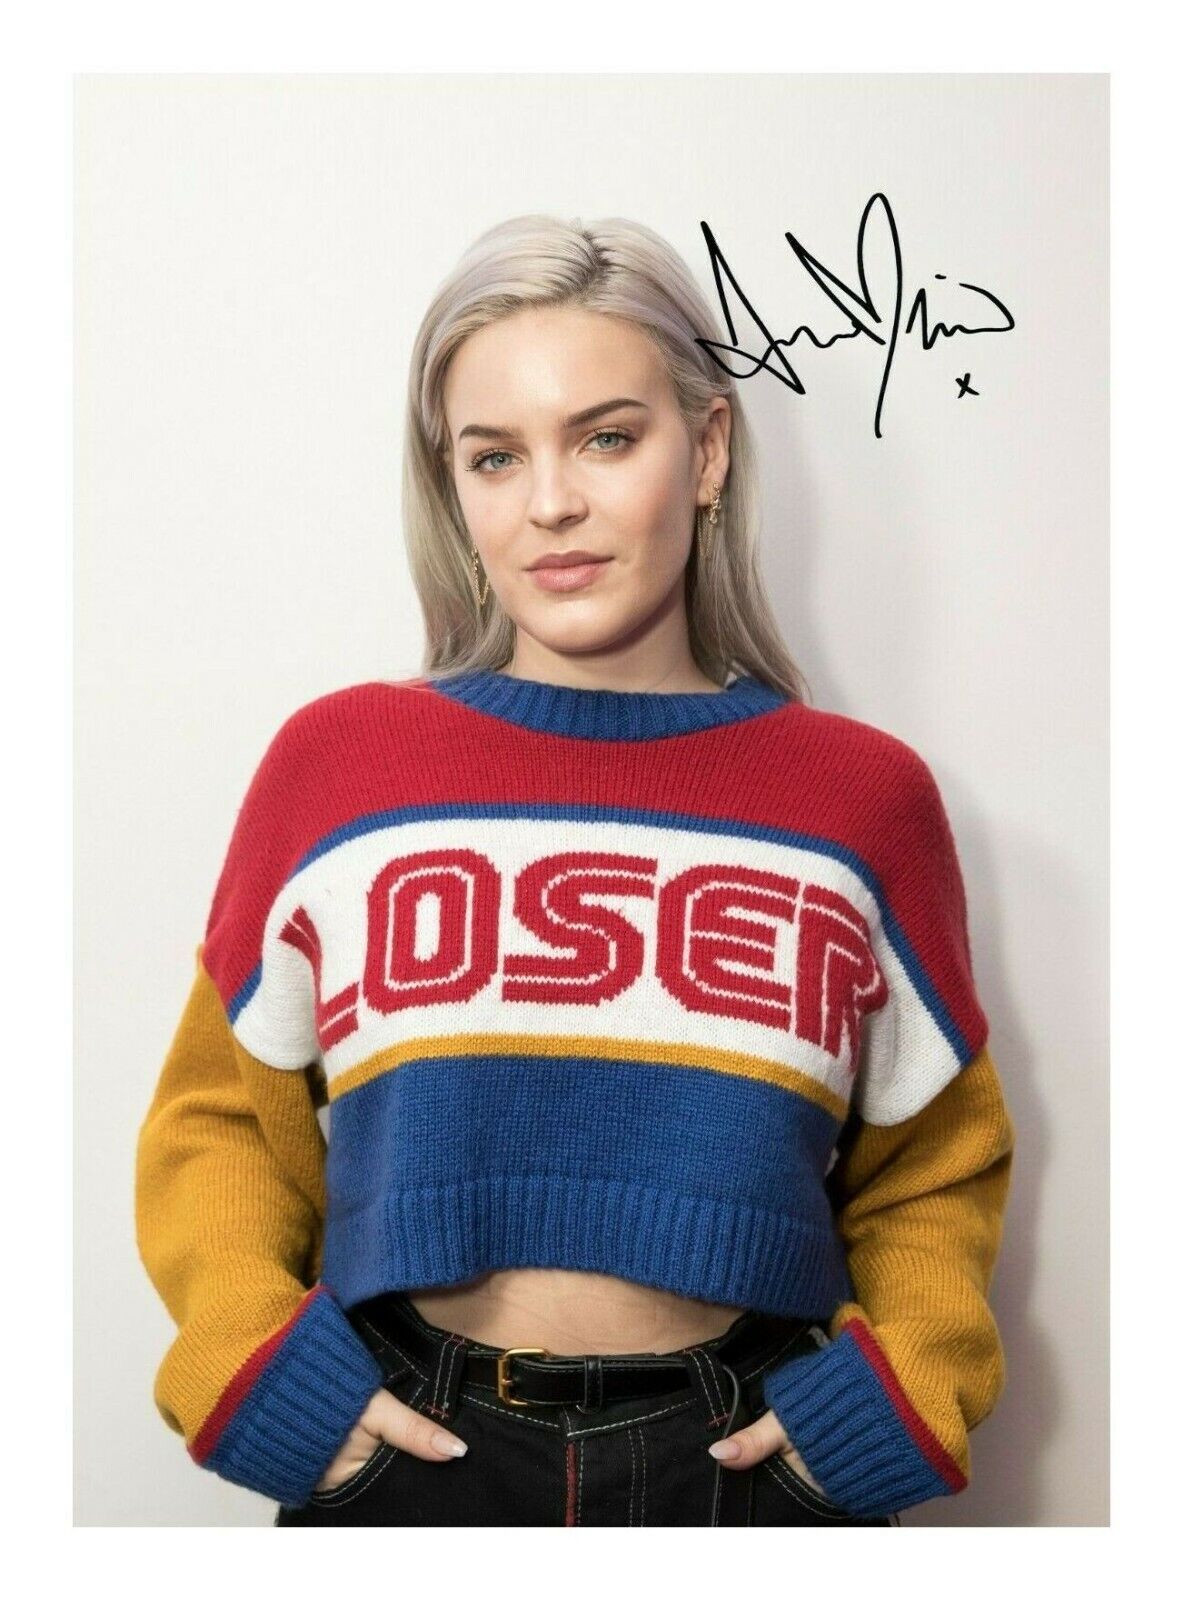 ANNE MARIE AUTOGRAPH SIGNED PP Photo Poster painting POSTER